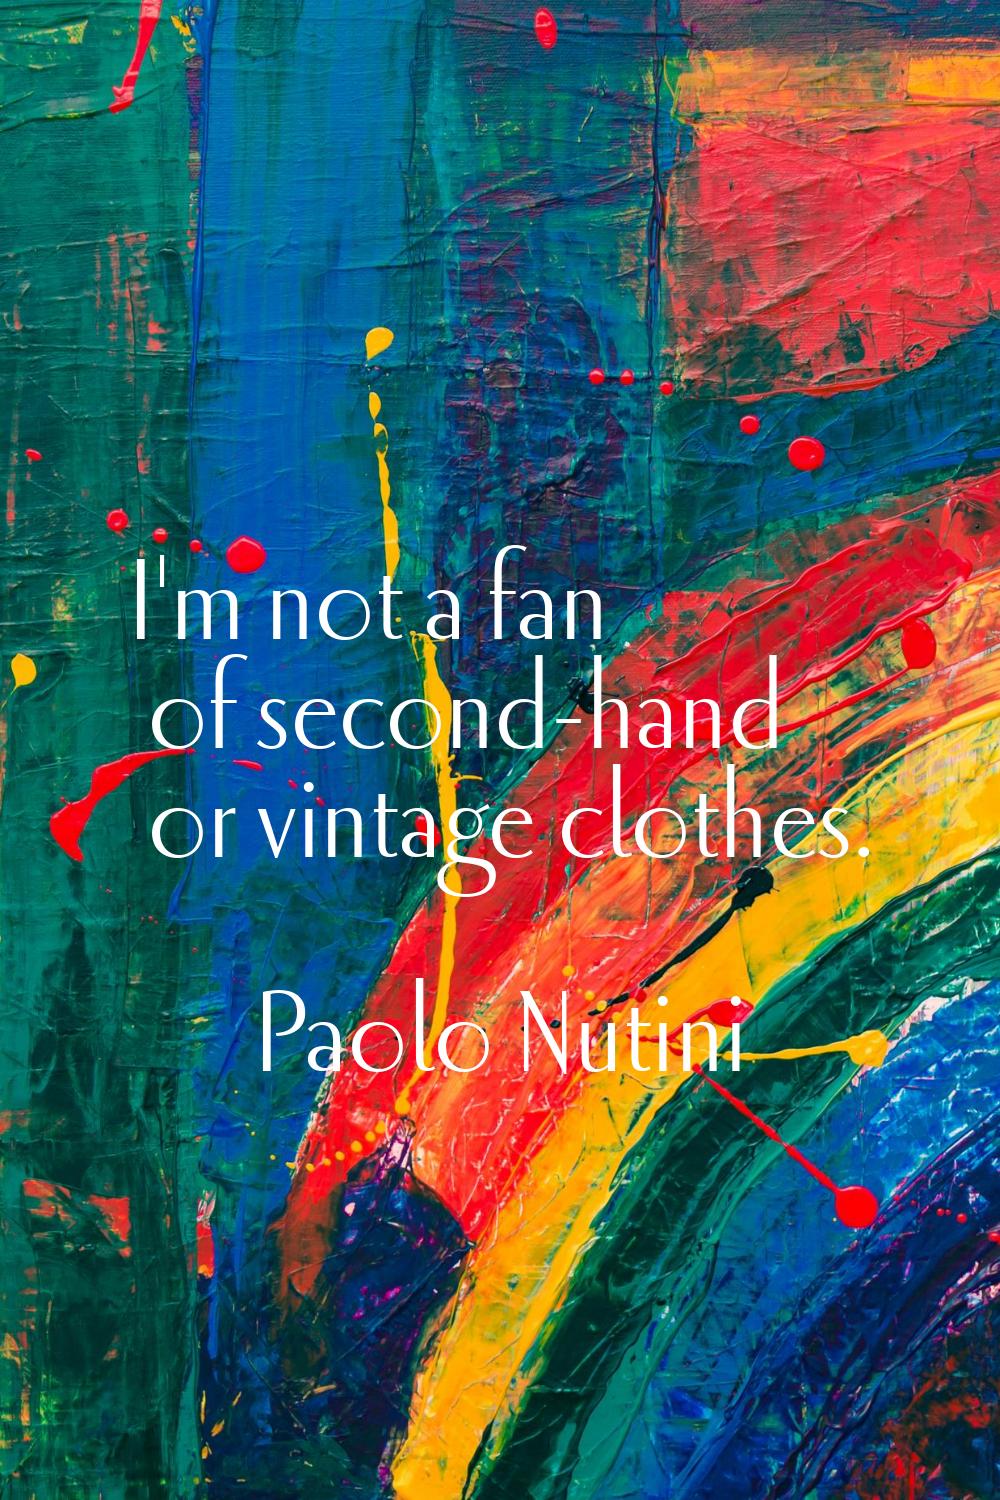 I'm not a fan of second-hand or vintage clothes.